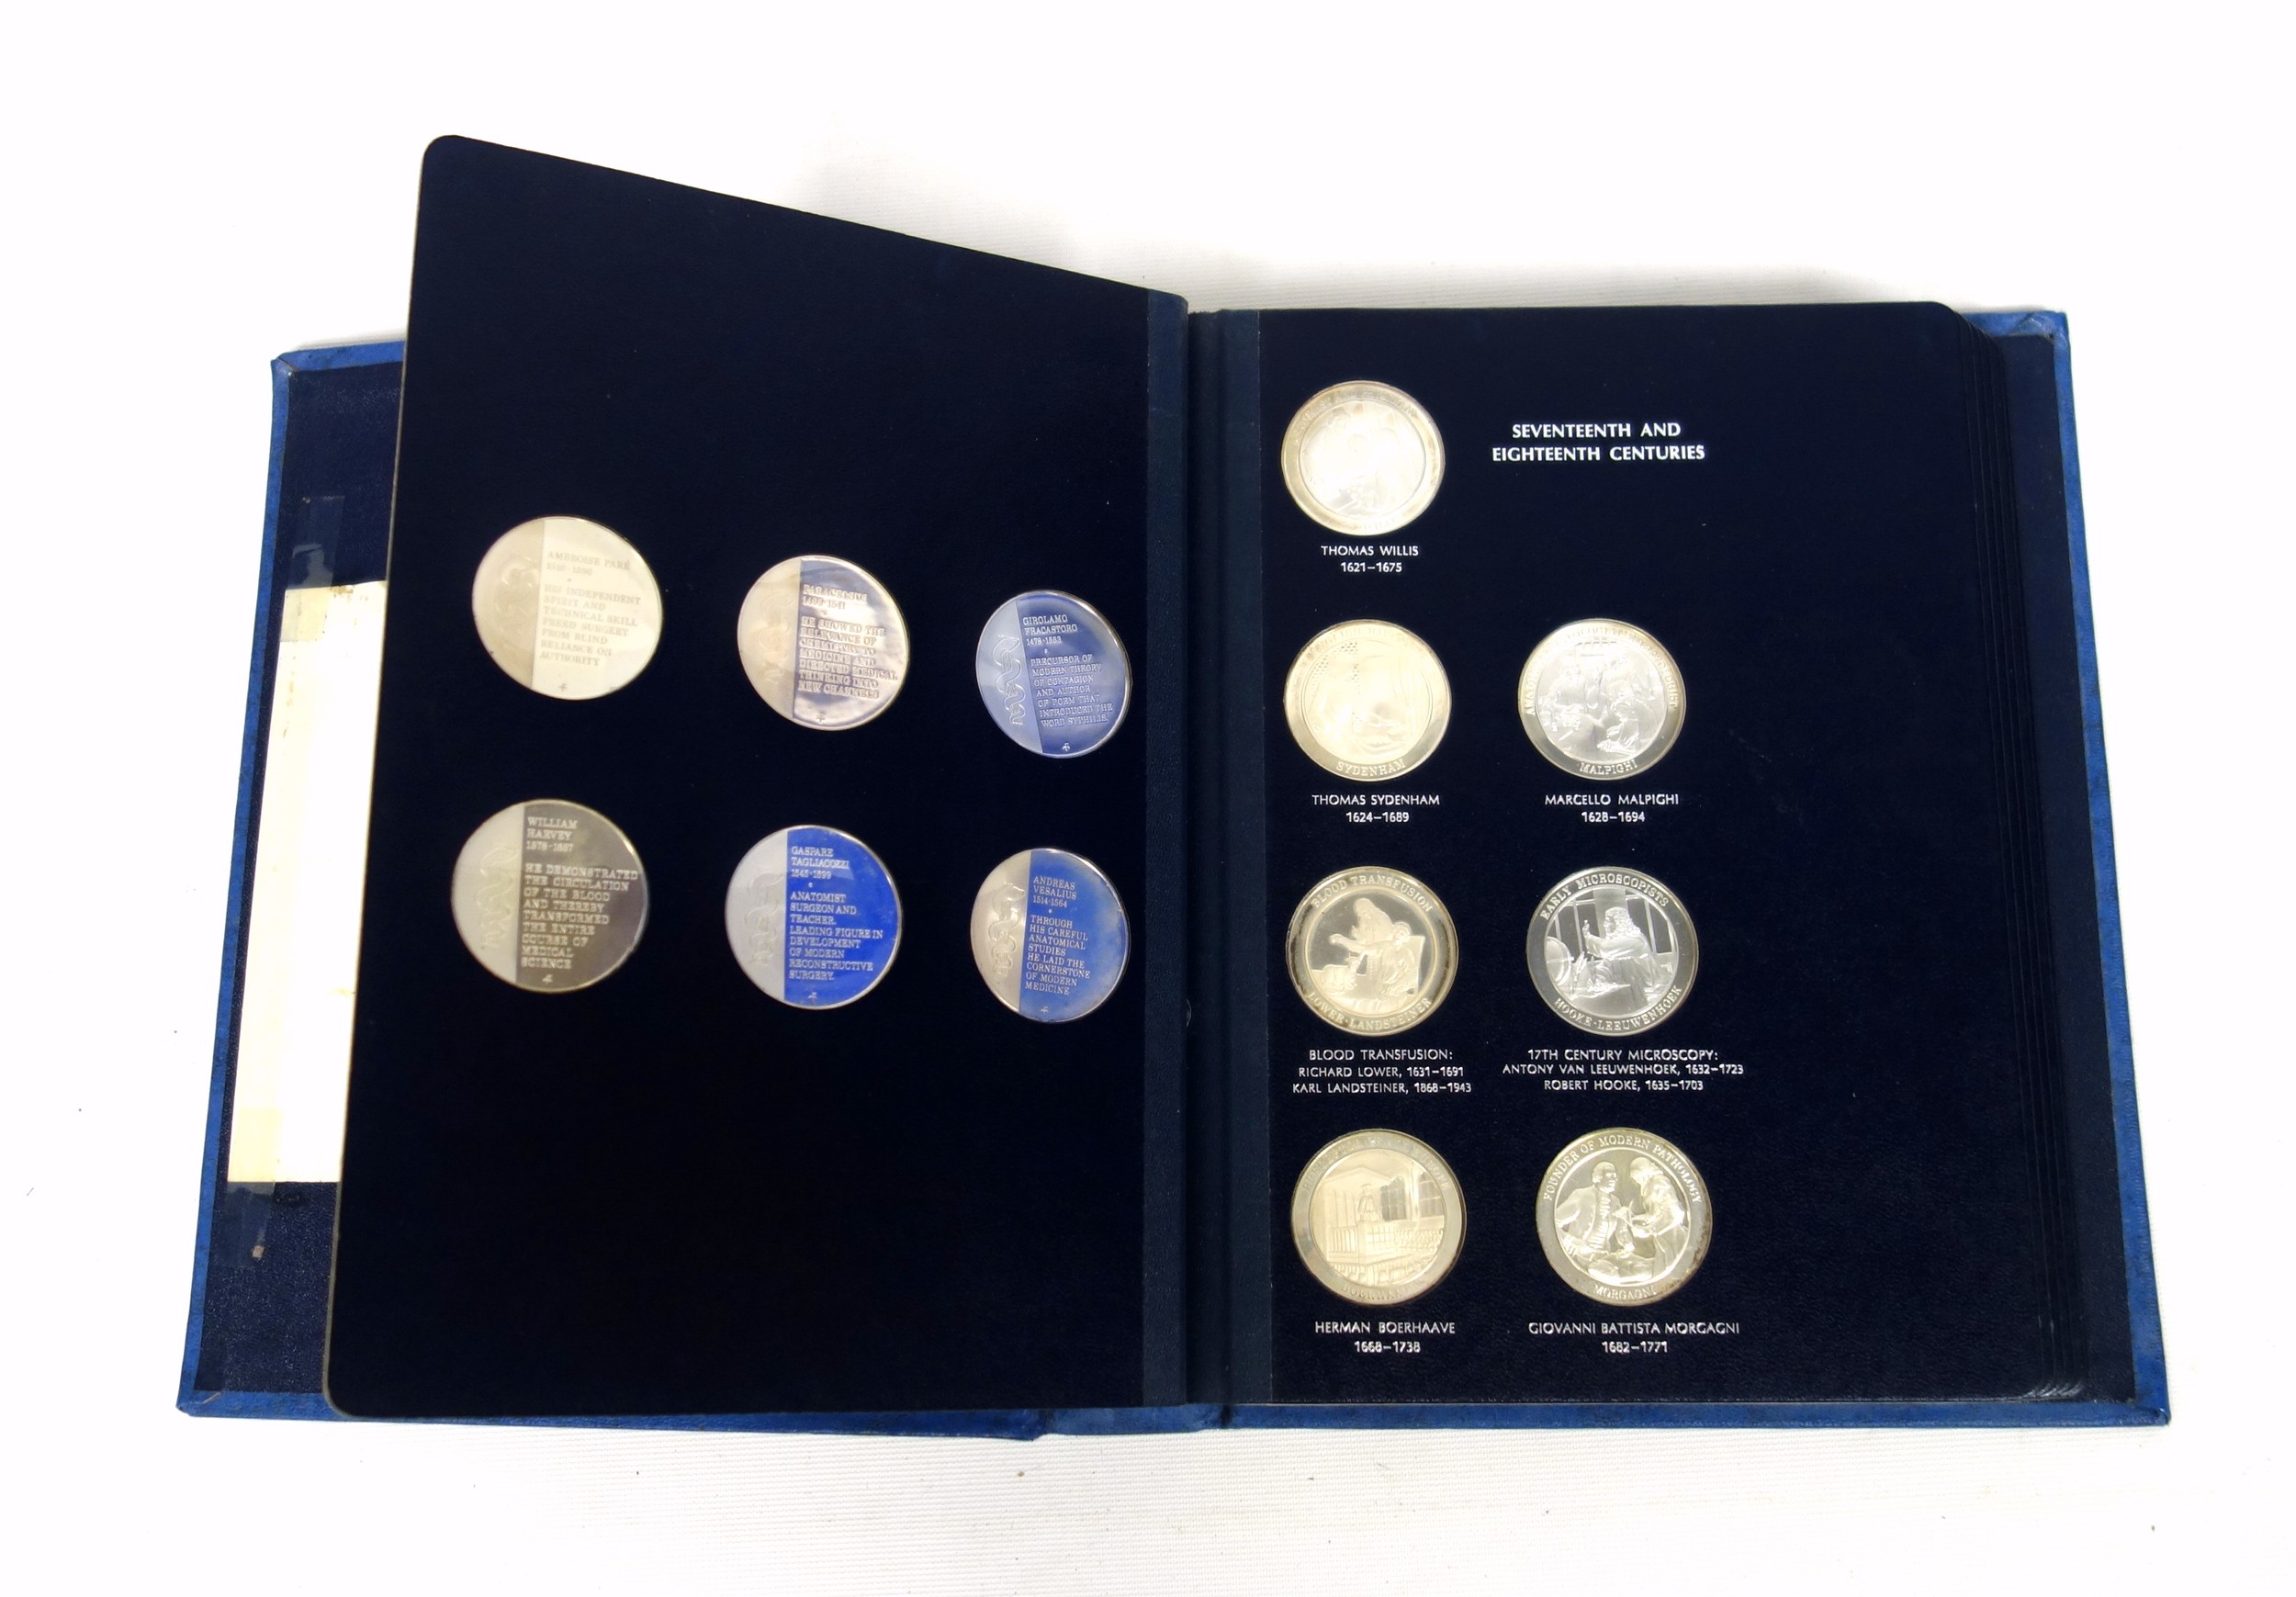 Systema Sciences Ltd. set of 66 Medallic History of Medicine silver special mint finish medals, - Image 5 of 11